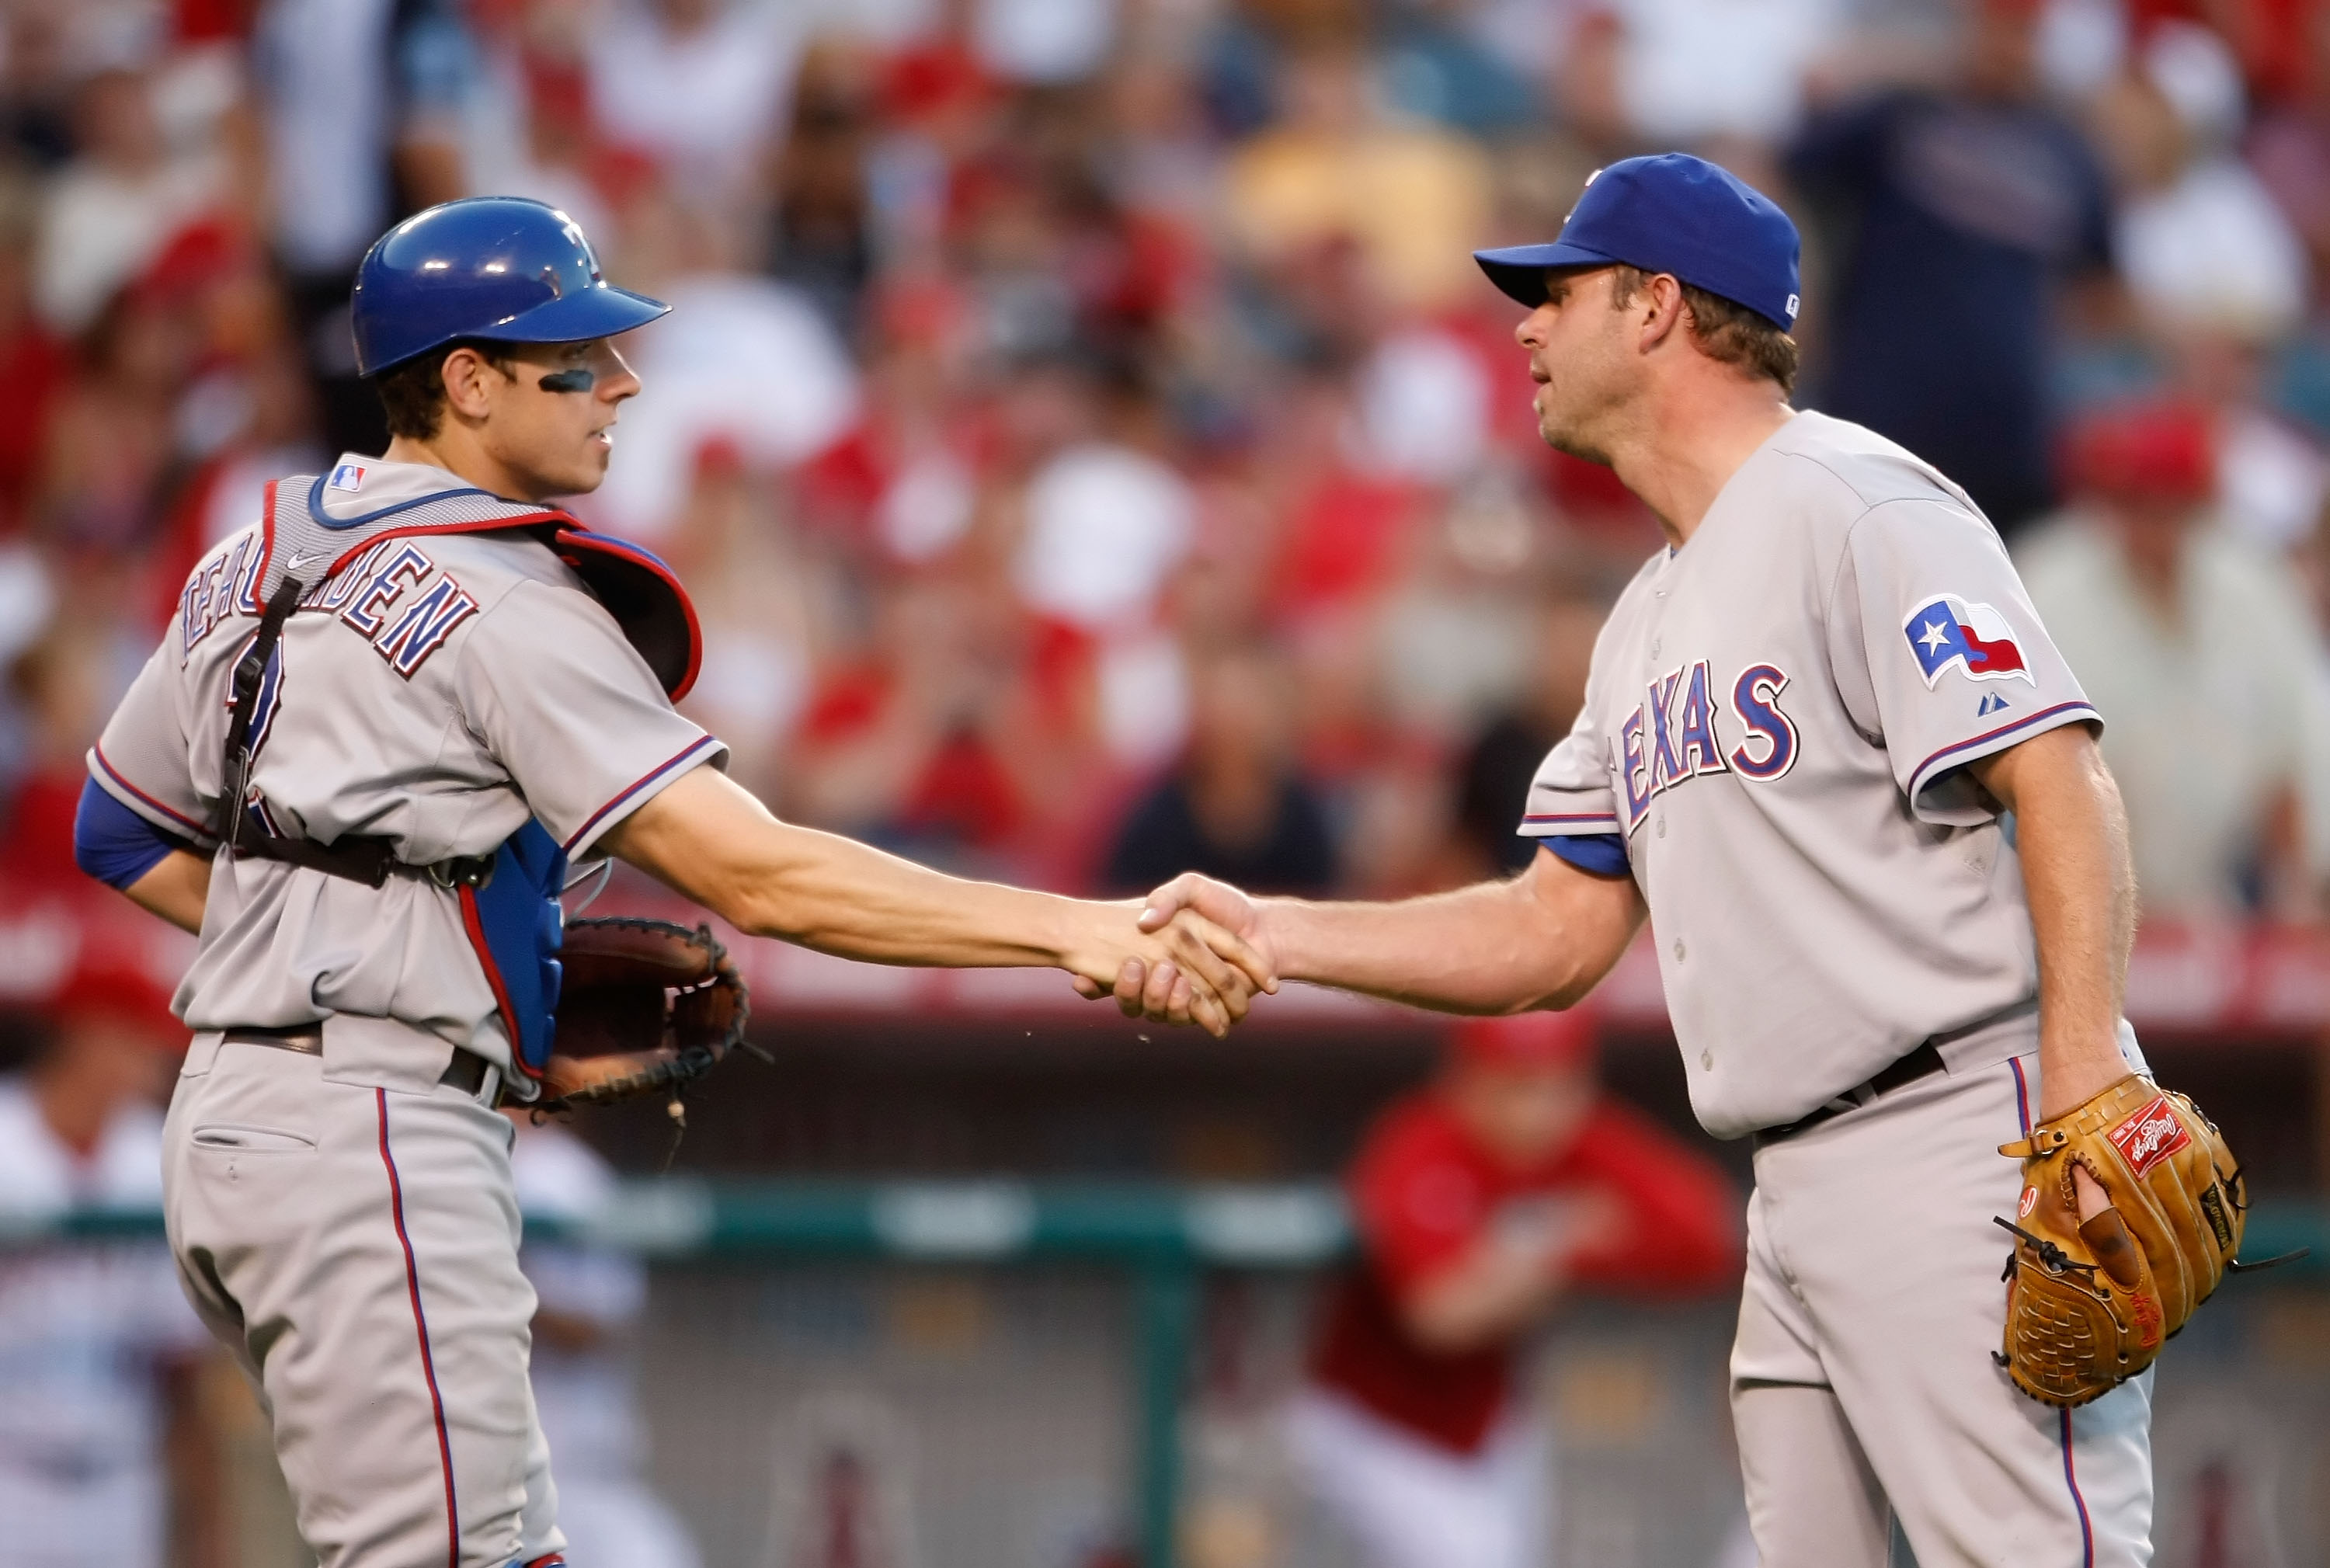 The week in pictures  Rangers opening day, Texas rangers opening day,  Texas rangers